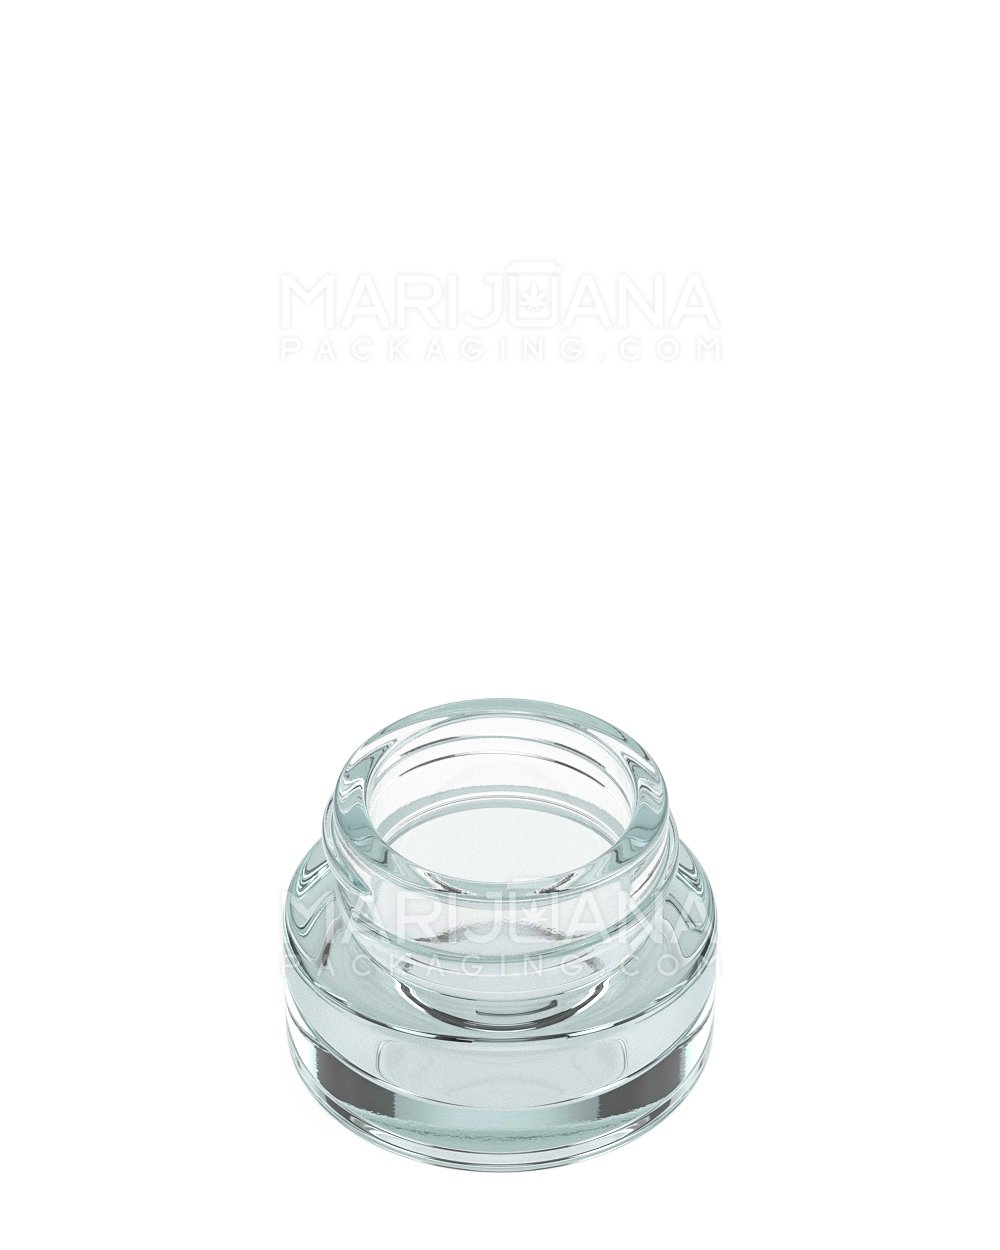 Clear Glass Concentrate Containers | 29mm - 5mL - 504 Count - 2